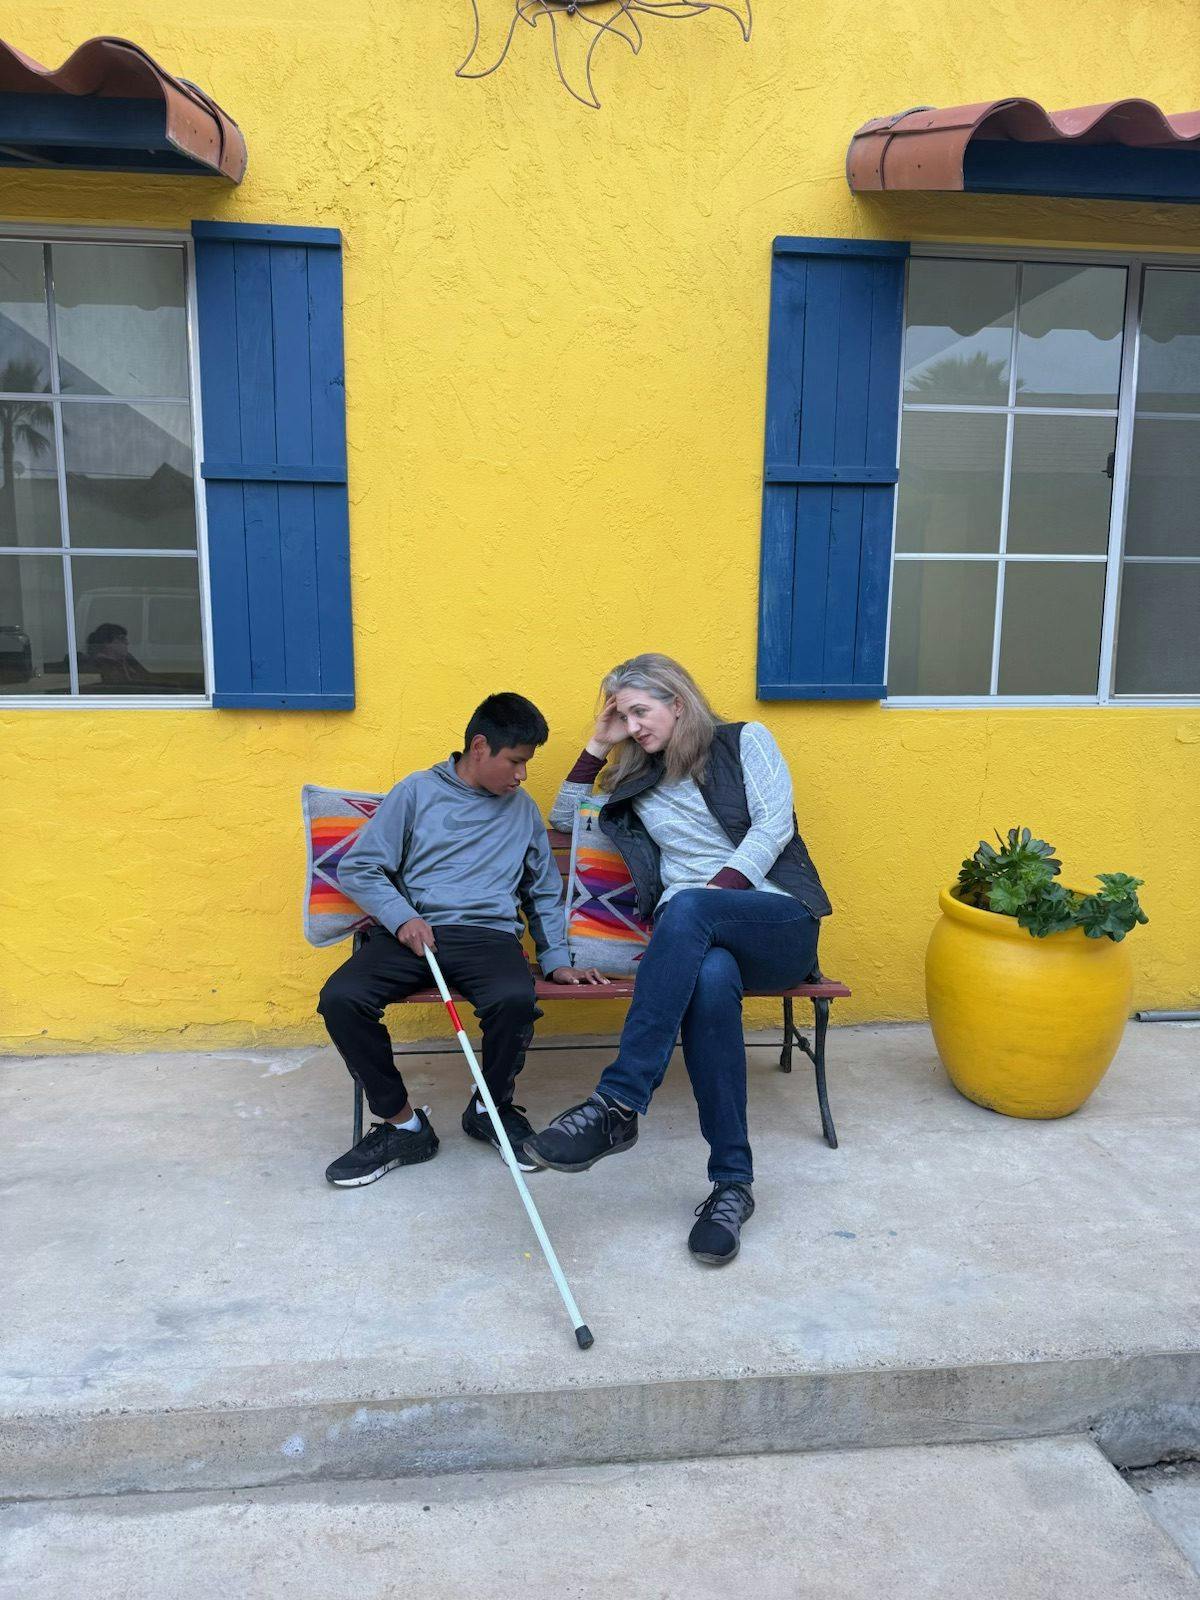 young man with disabilities sits on a bench next to a woman, Nicole Zinn, against a bright yellow building with windows with blue shutters in Mexico